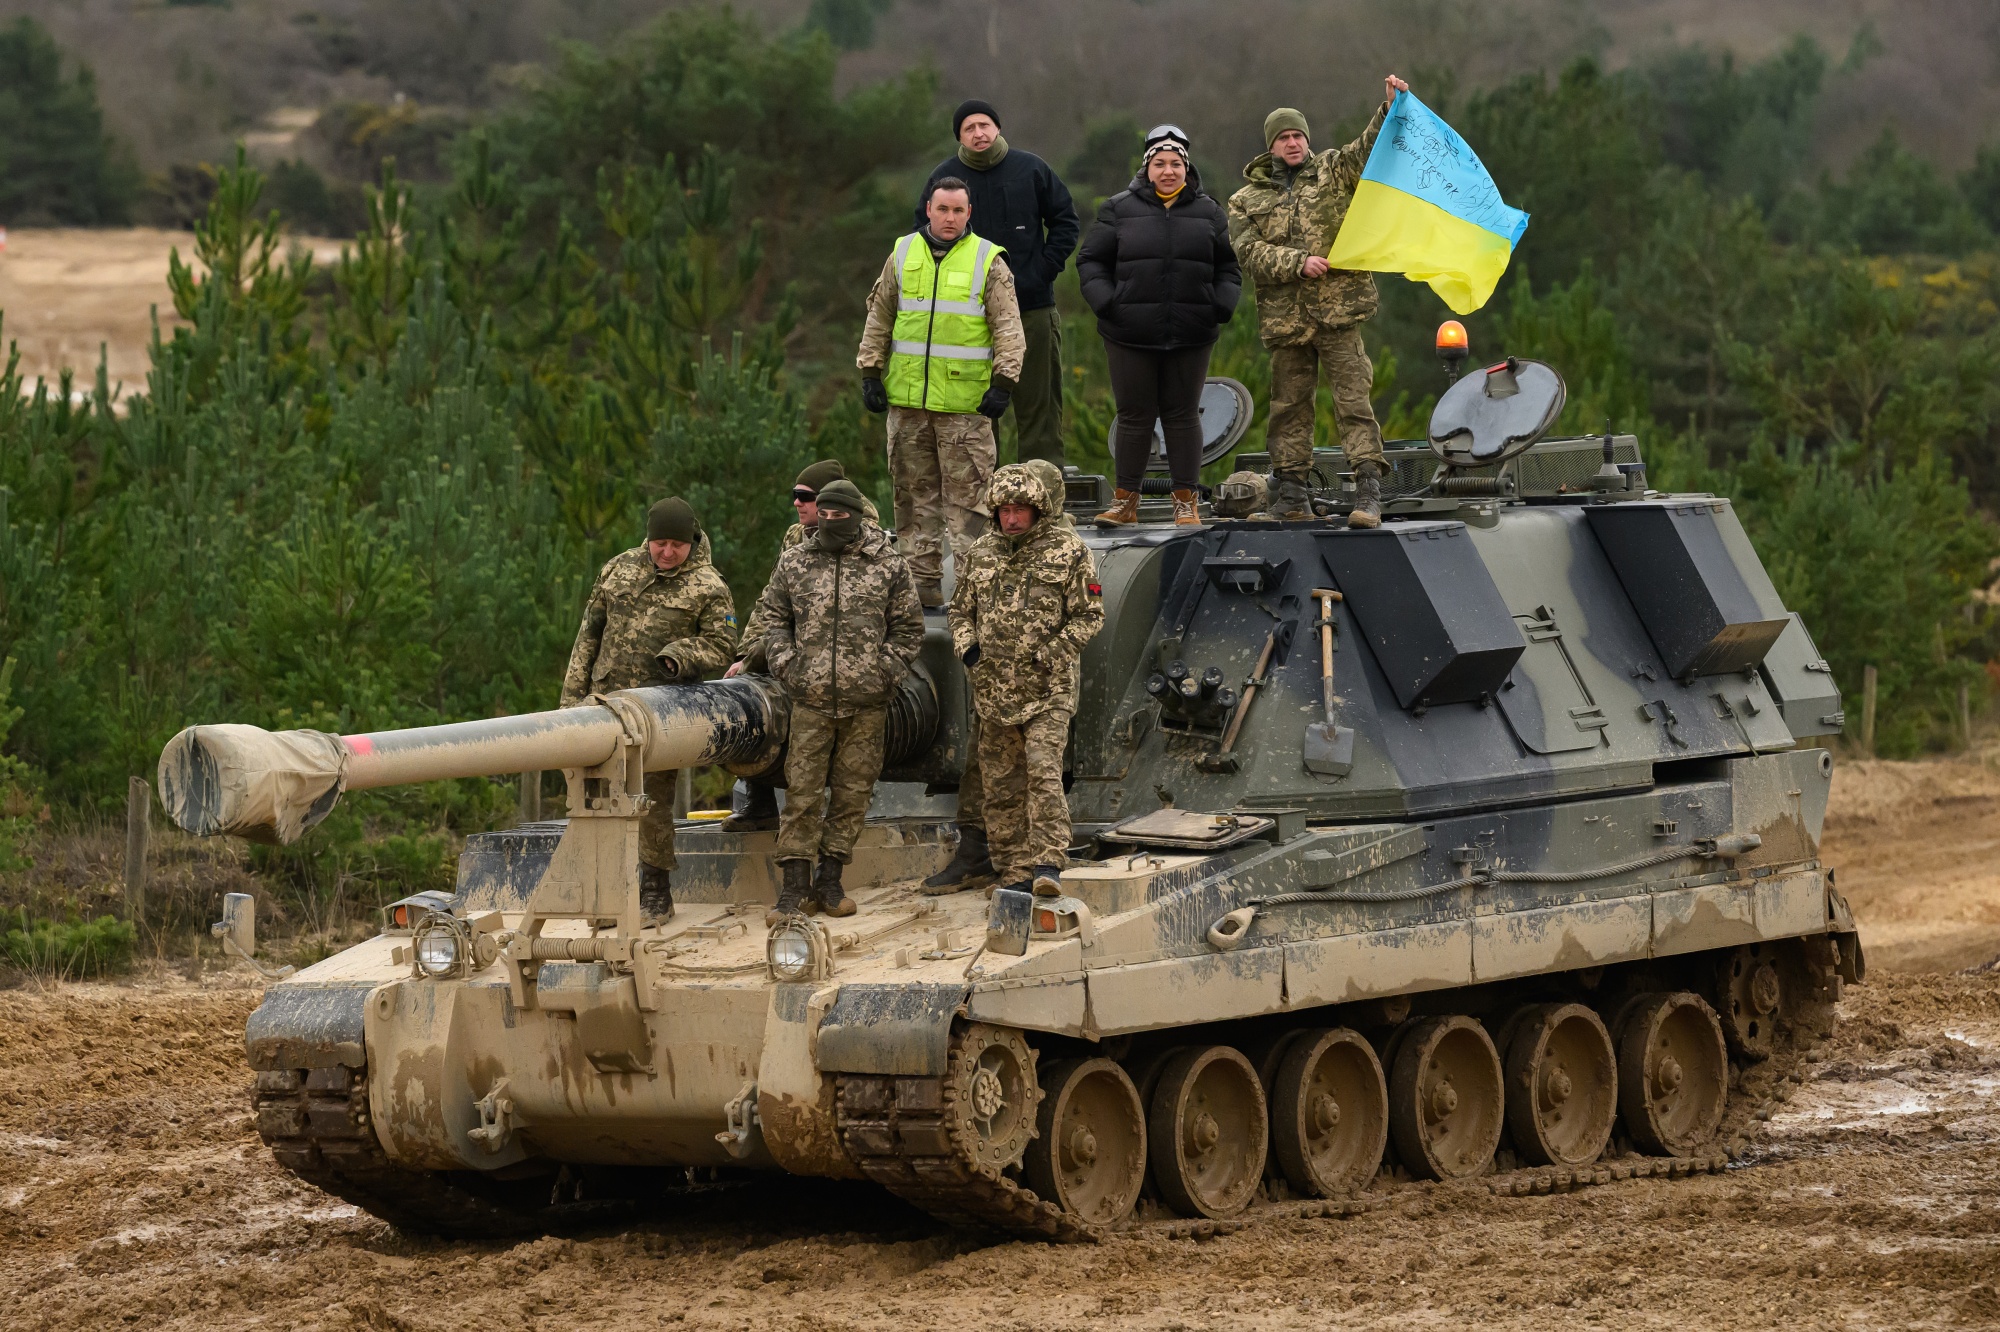 Ukraine War Support Shouldnt Be Tied to Spring Offensive Against Russia